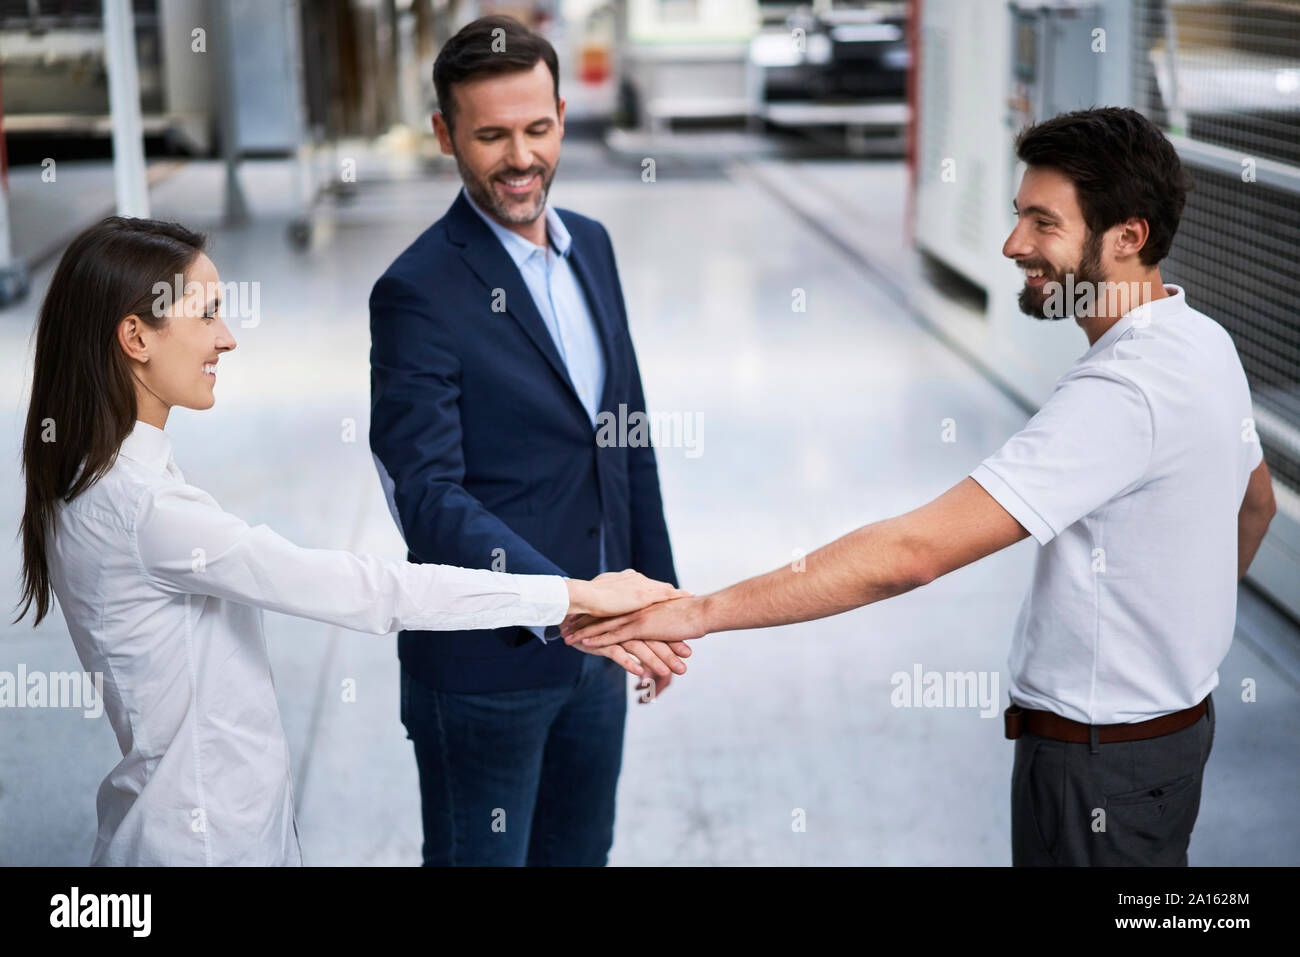 Businessman and employees stacking hands in a factory Stock Photo